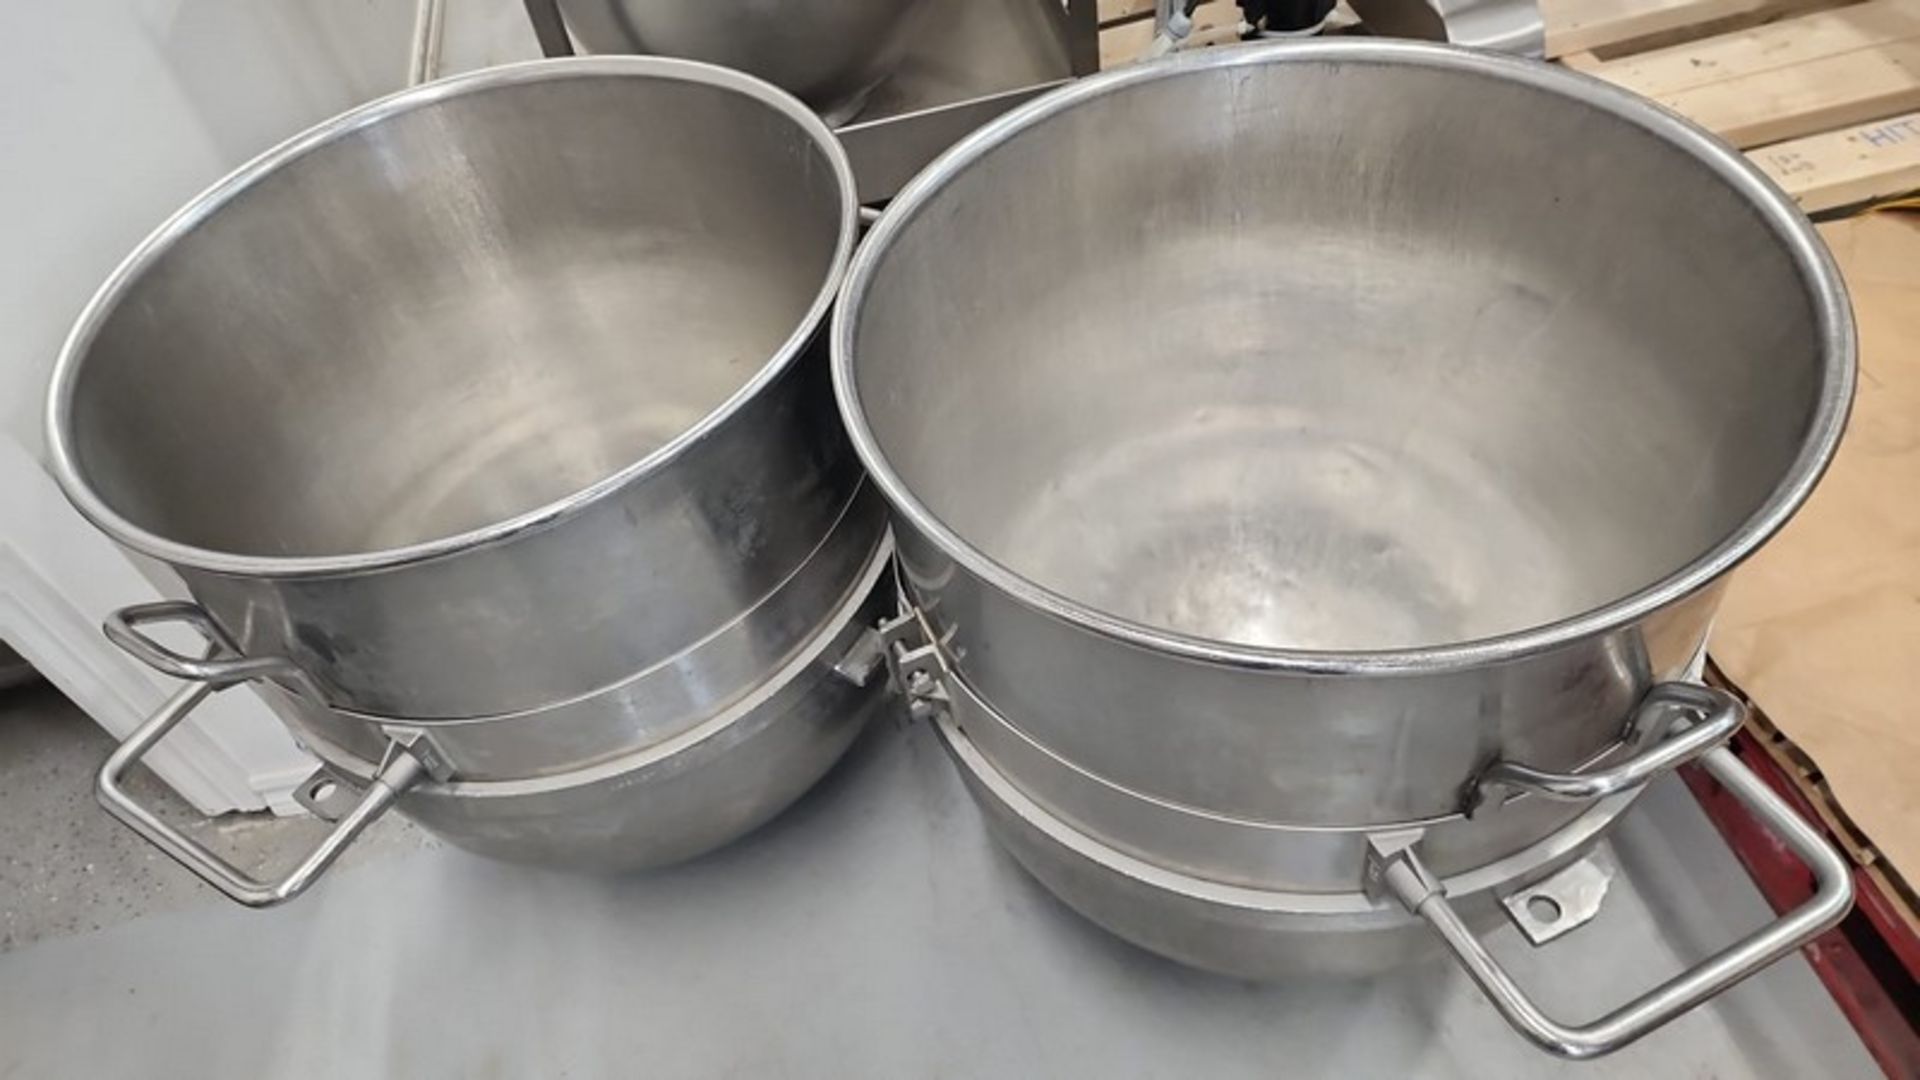 2 x Hobart 140Q Stainless original bowl Will fit a Hobart V1401 mixer (Item #103X) (Simple Loading